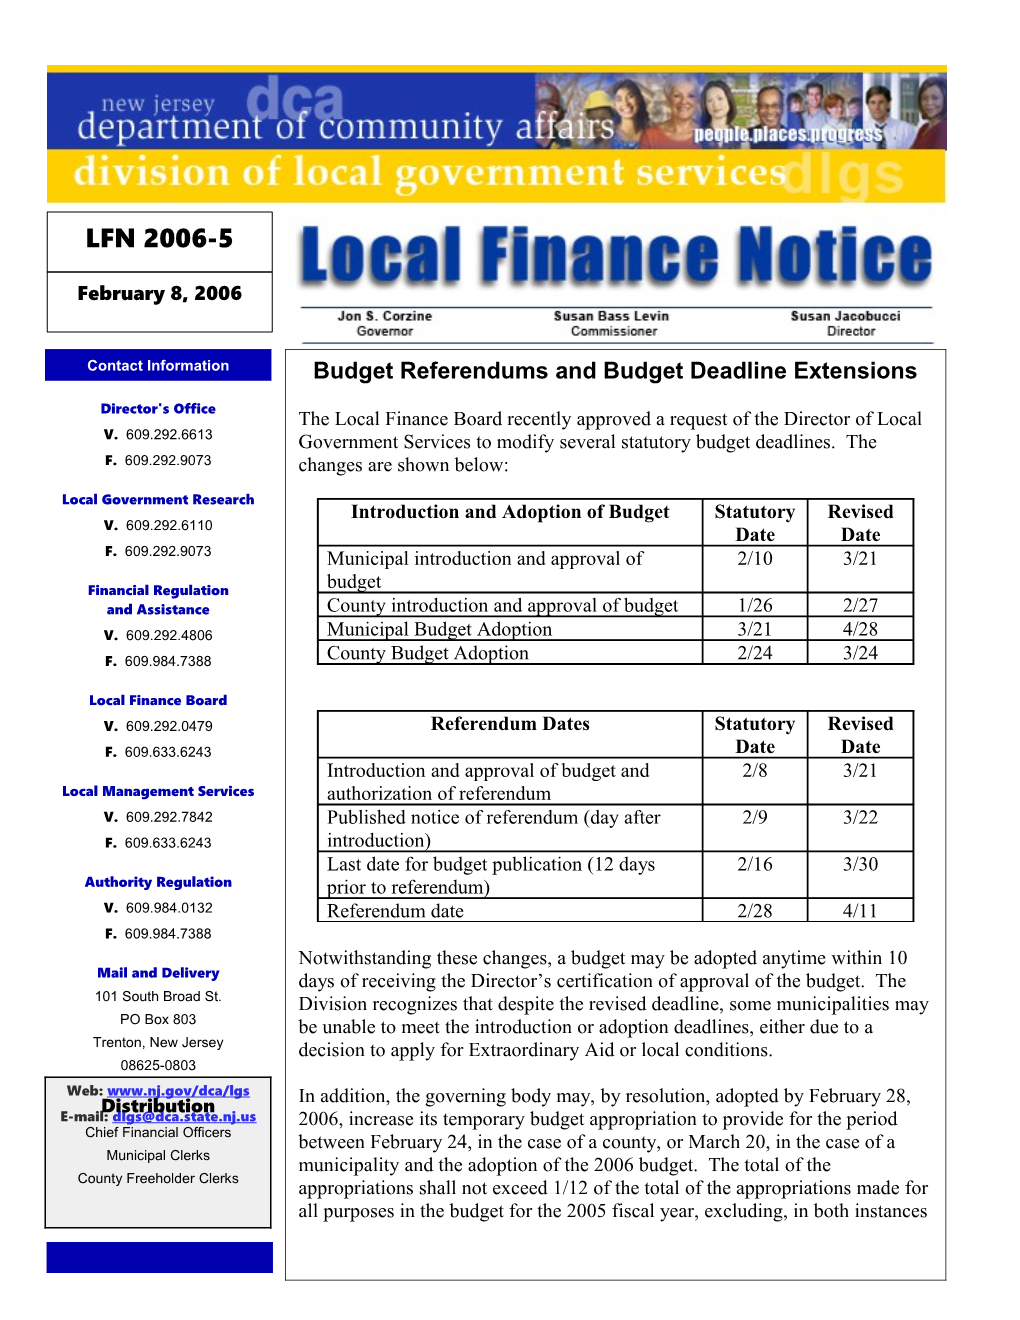 Local Finance Notice 2006-5February8, 2006Page 1